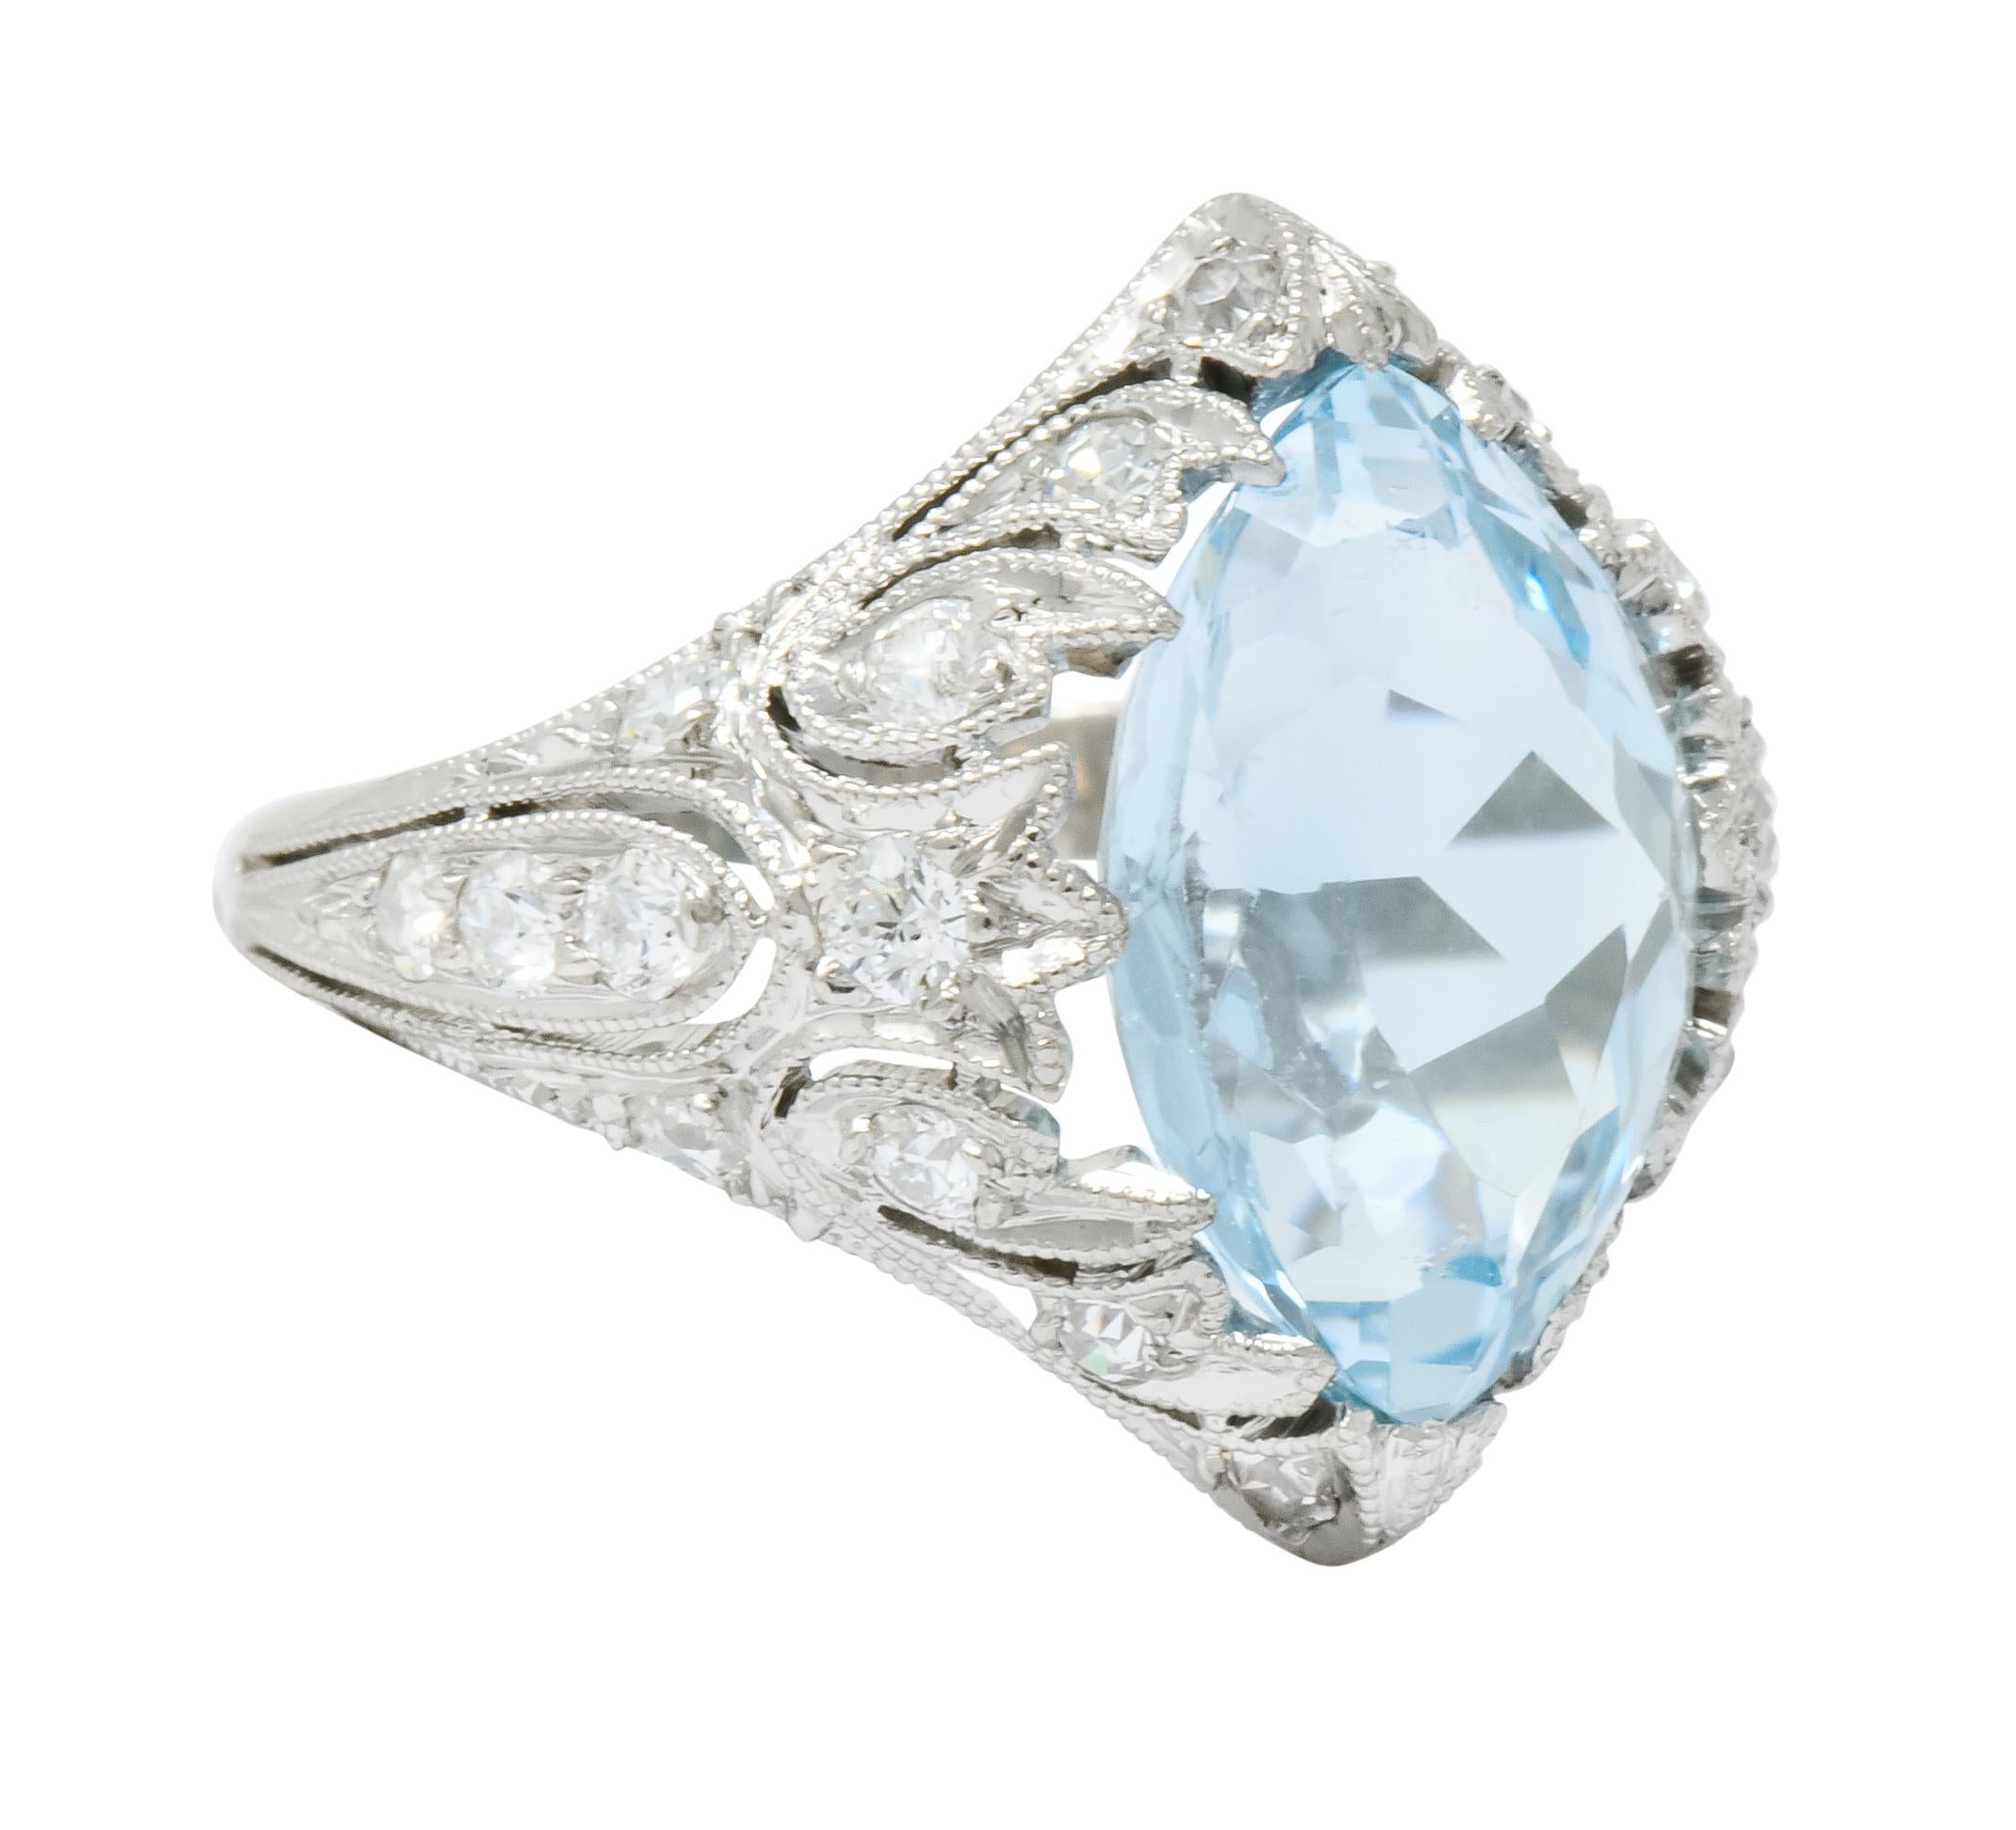 Gemstone ring designed as an ornate navette style mounting decorated with milgrain edges and pierced foliate motif

Centering a marquise cut aquamarine weighing approximately 2.83 carats, transparent with frosty blue coloring

Accented throughout by